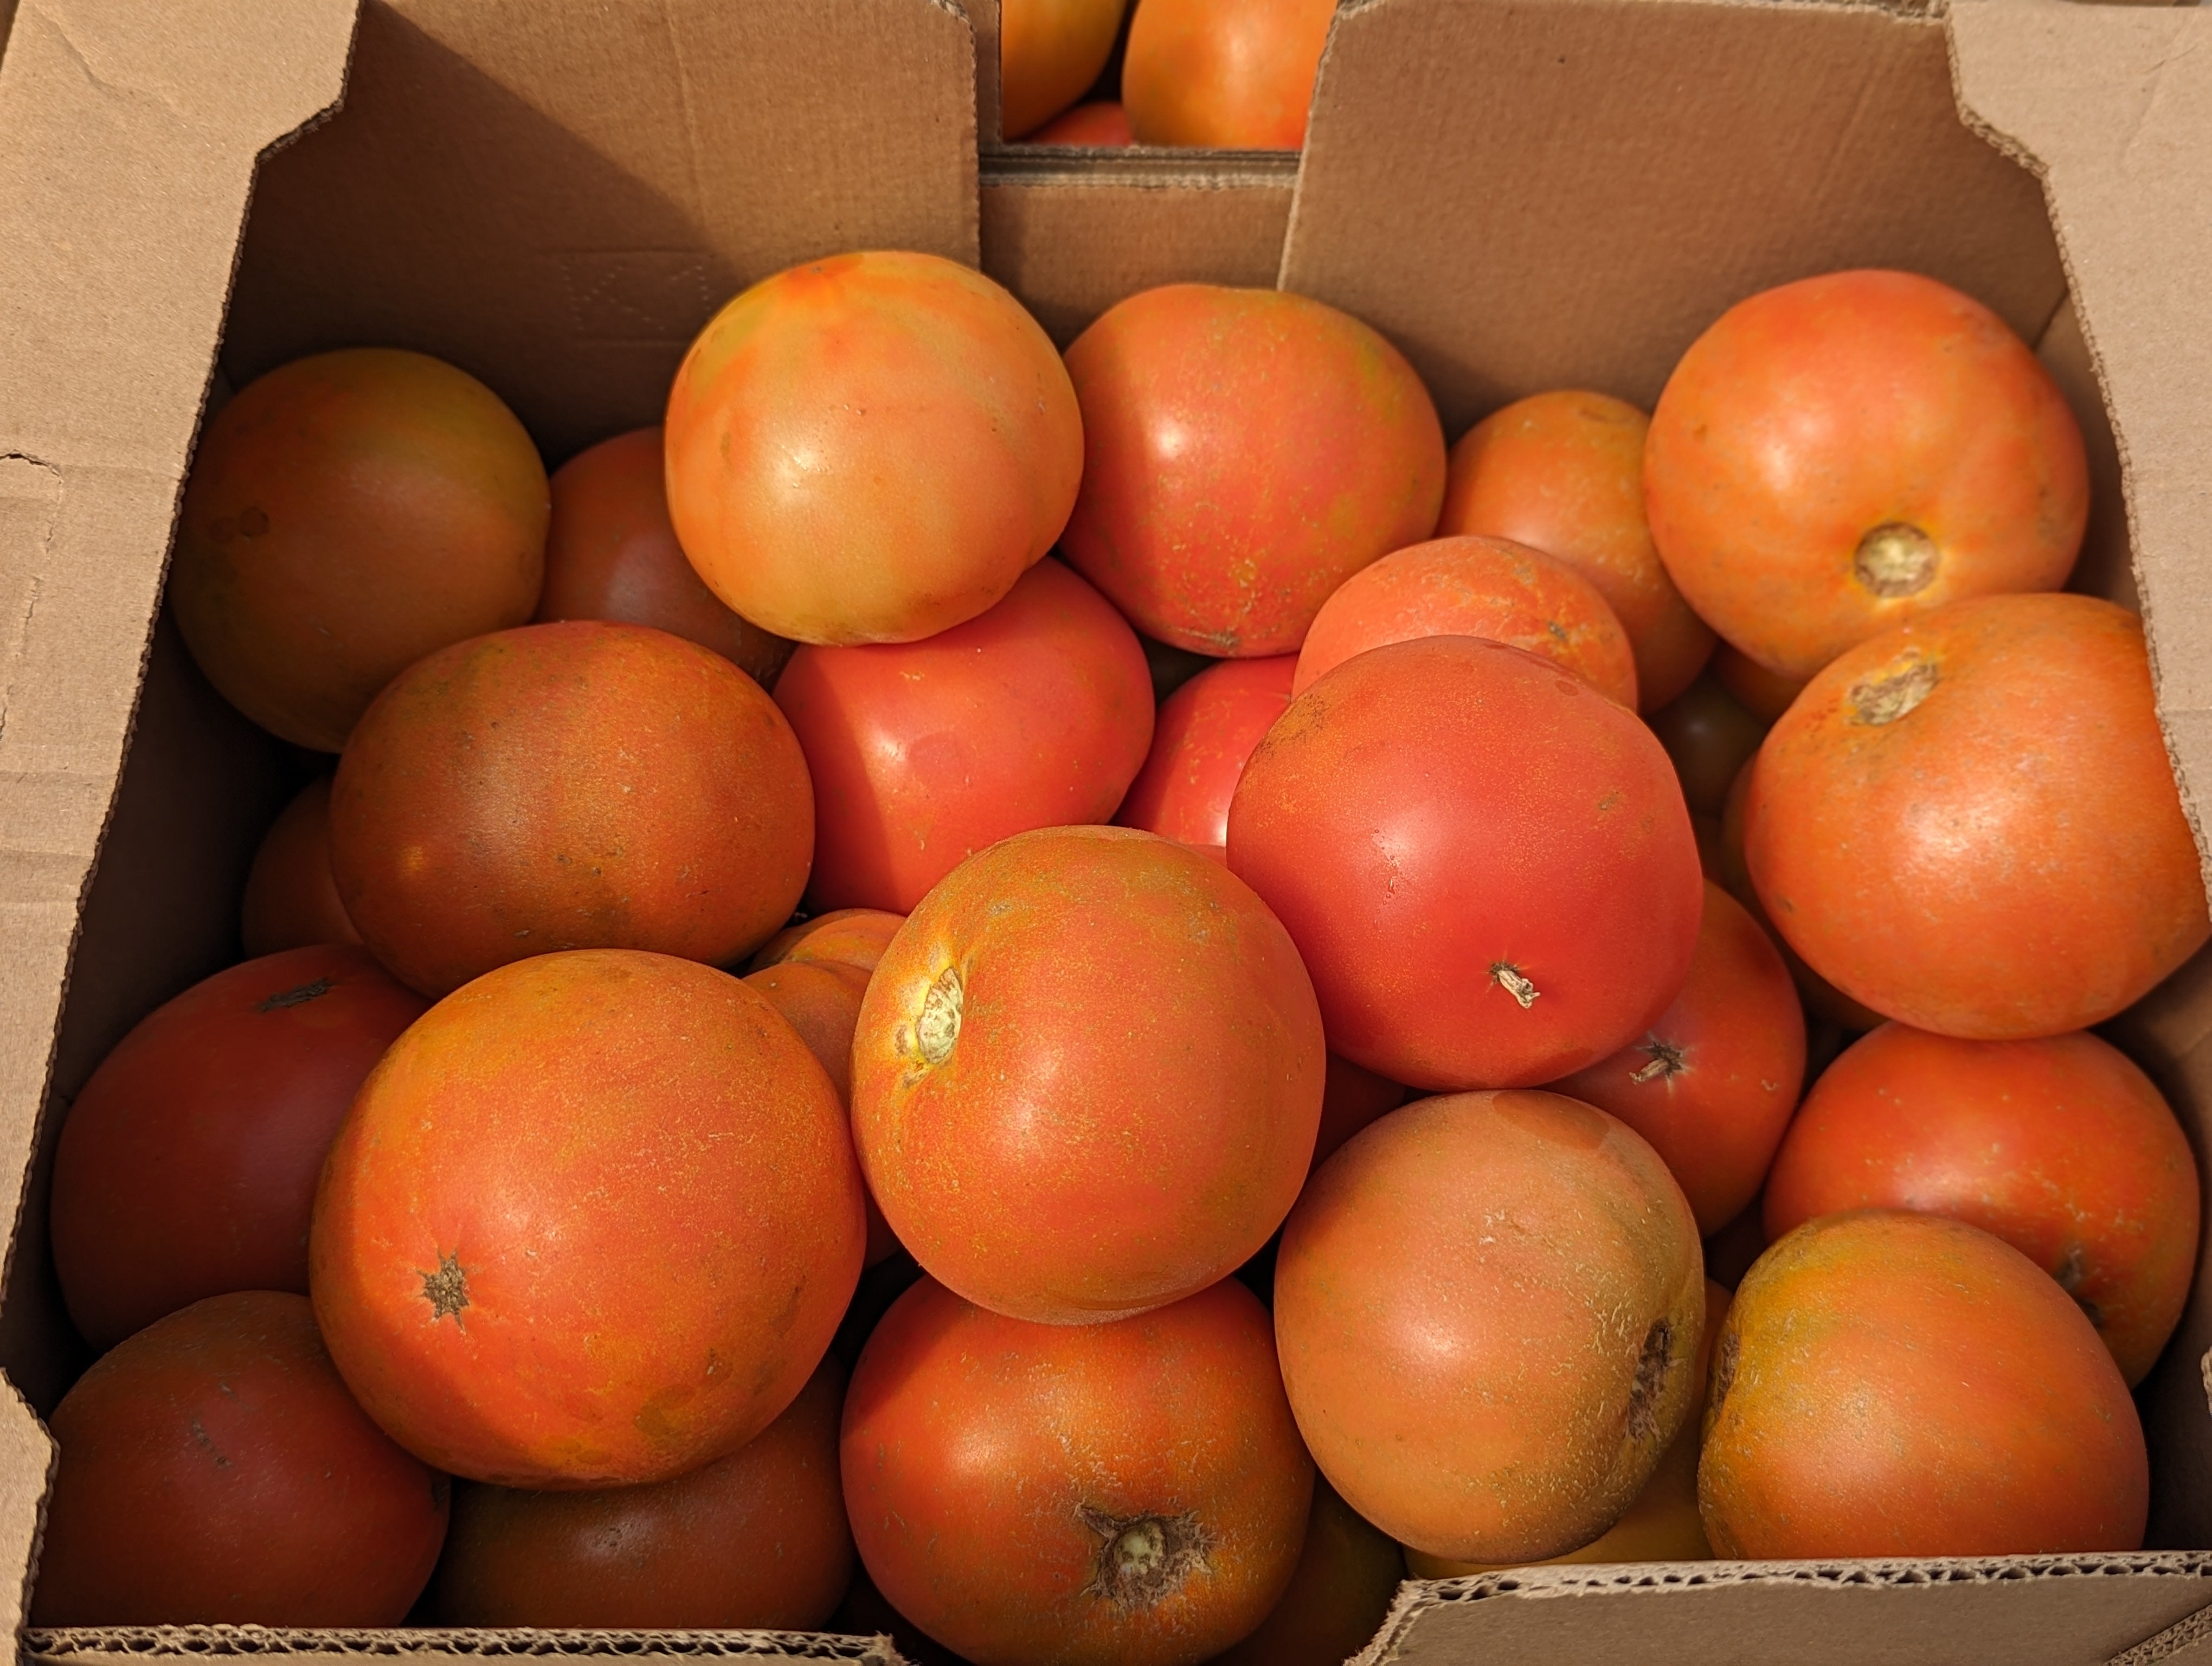 20lb Box of Imperfect Tomatoes